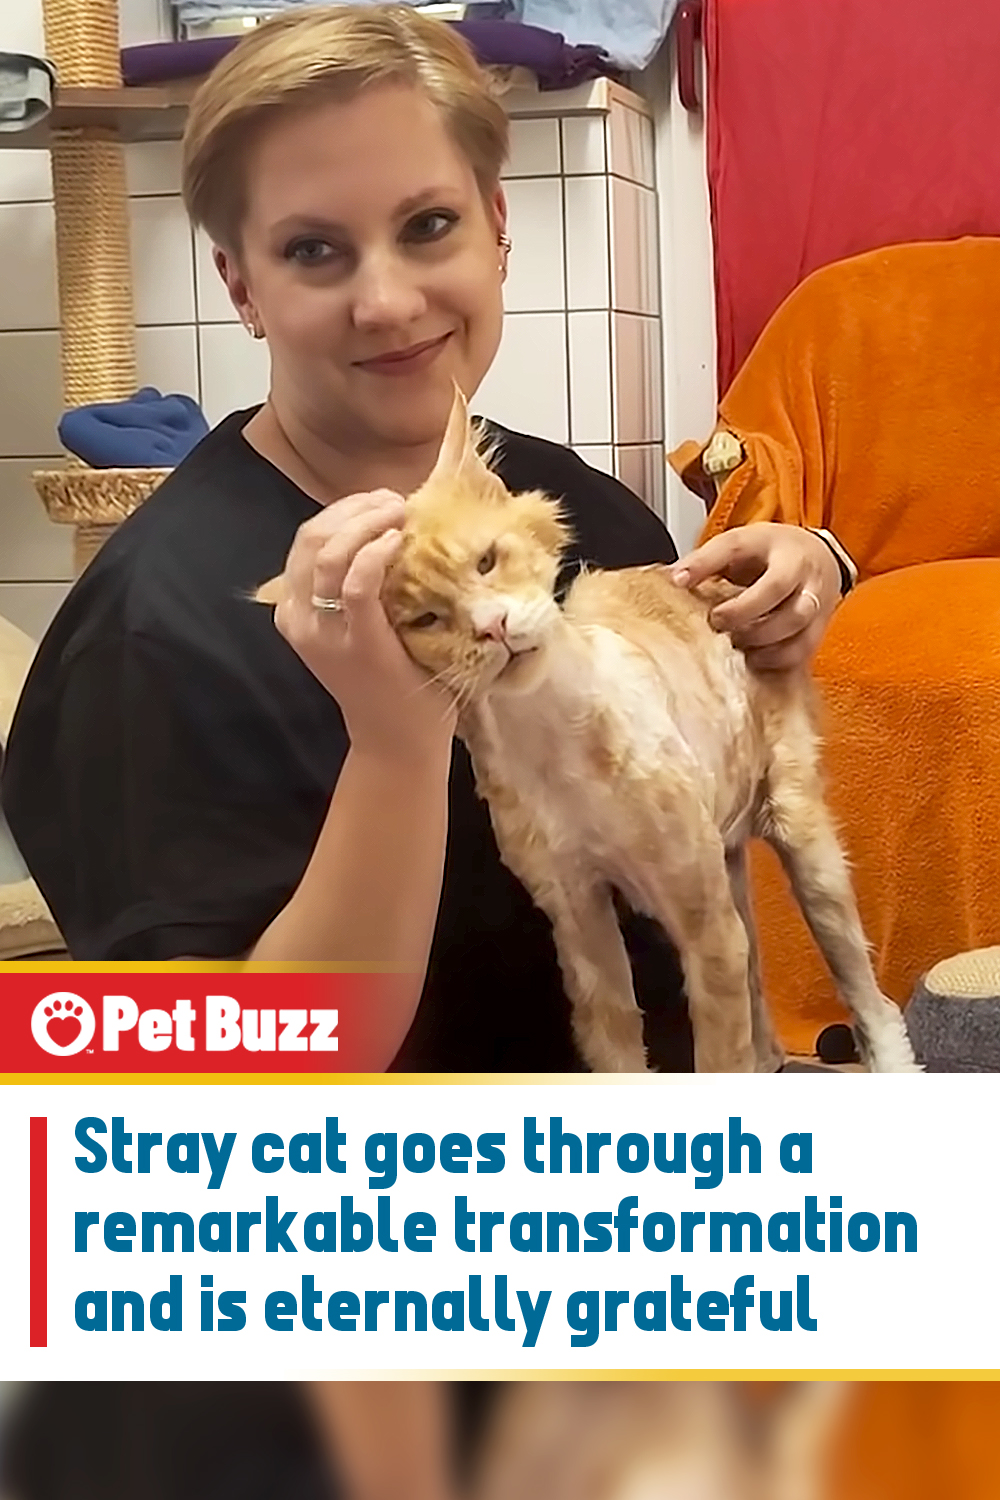 Stray cat goes through a remarkable transformation and is eternally grateful